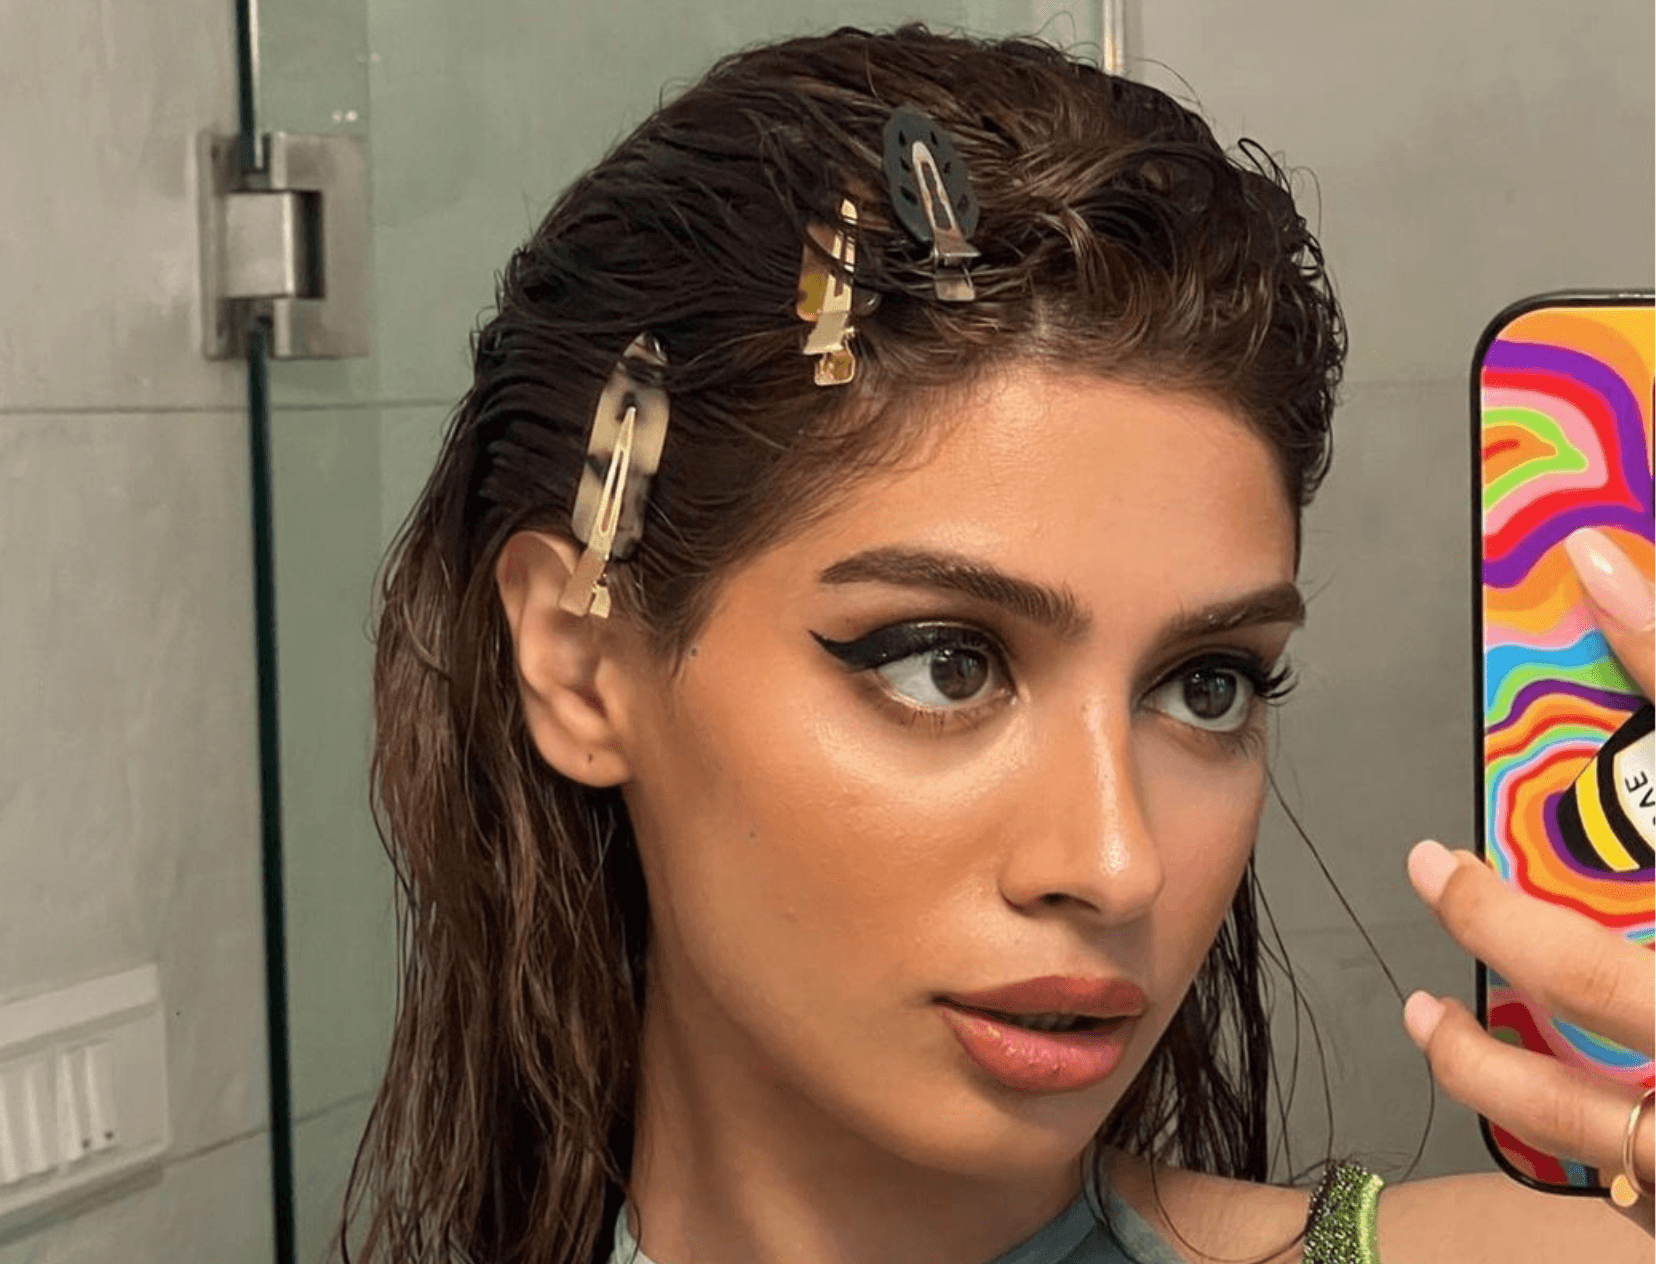 4 Unnecessary Beauty Trends GenZ Is Investing In